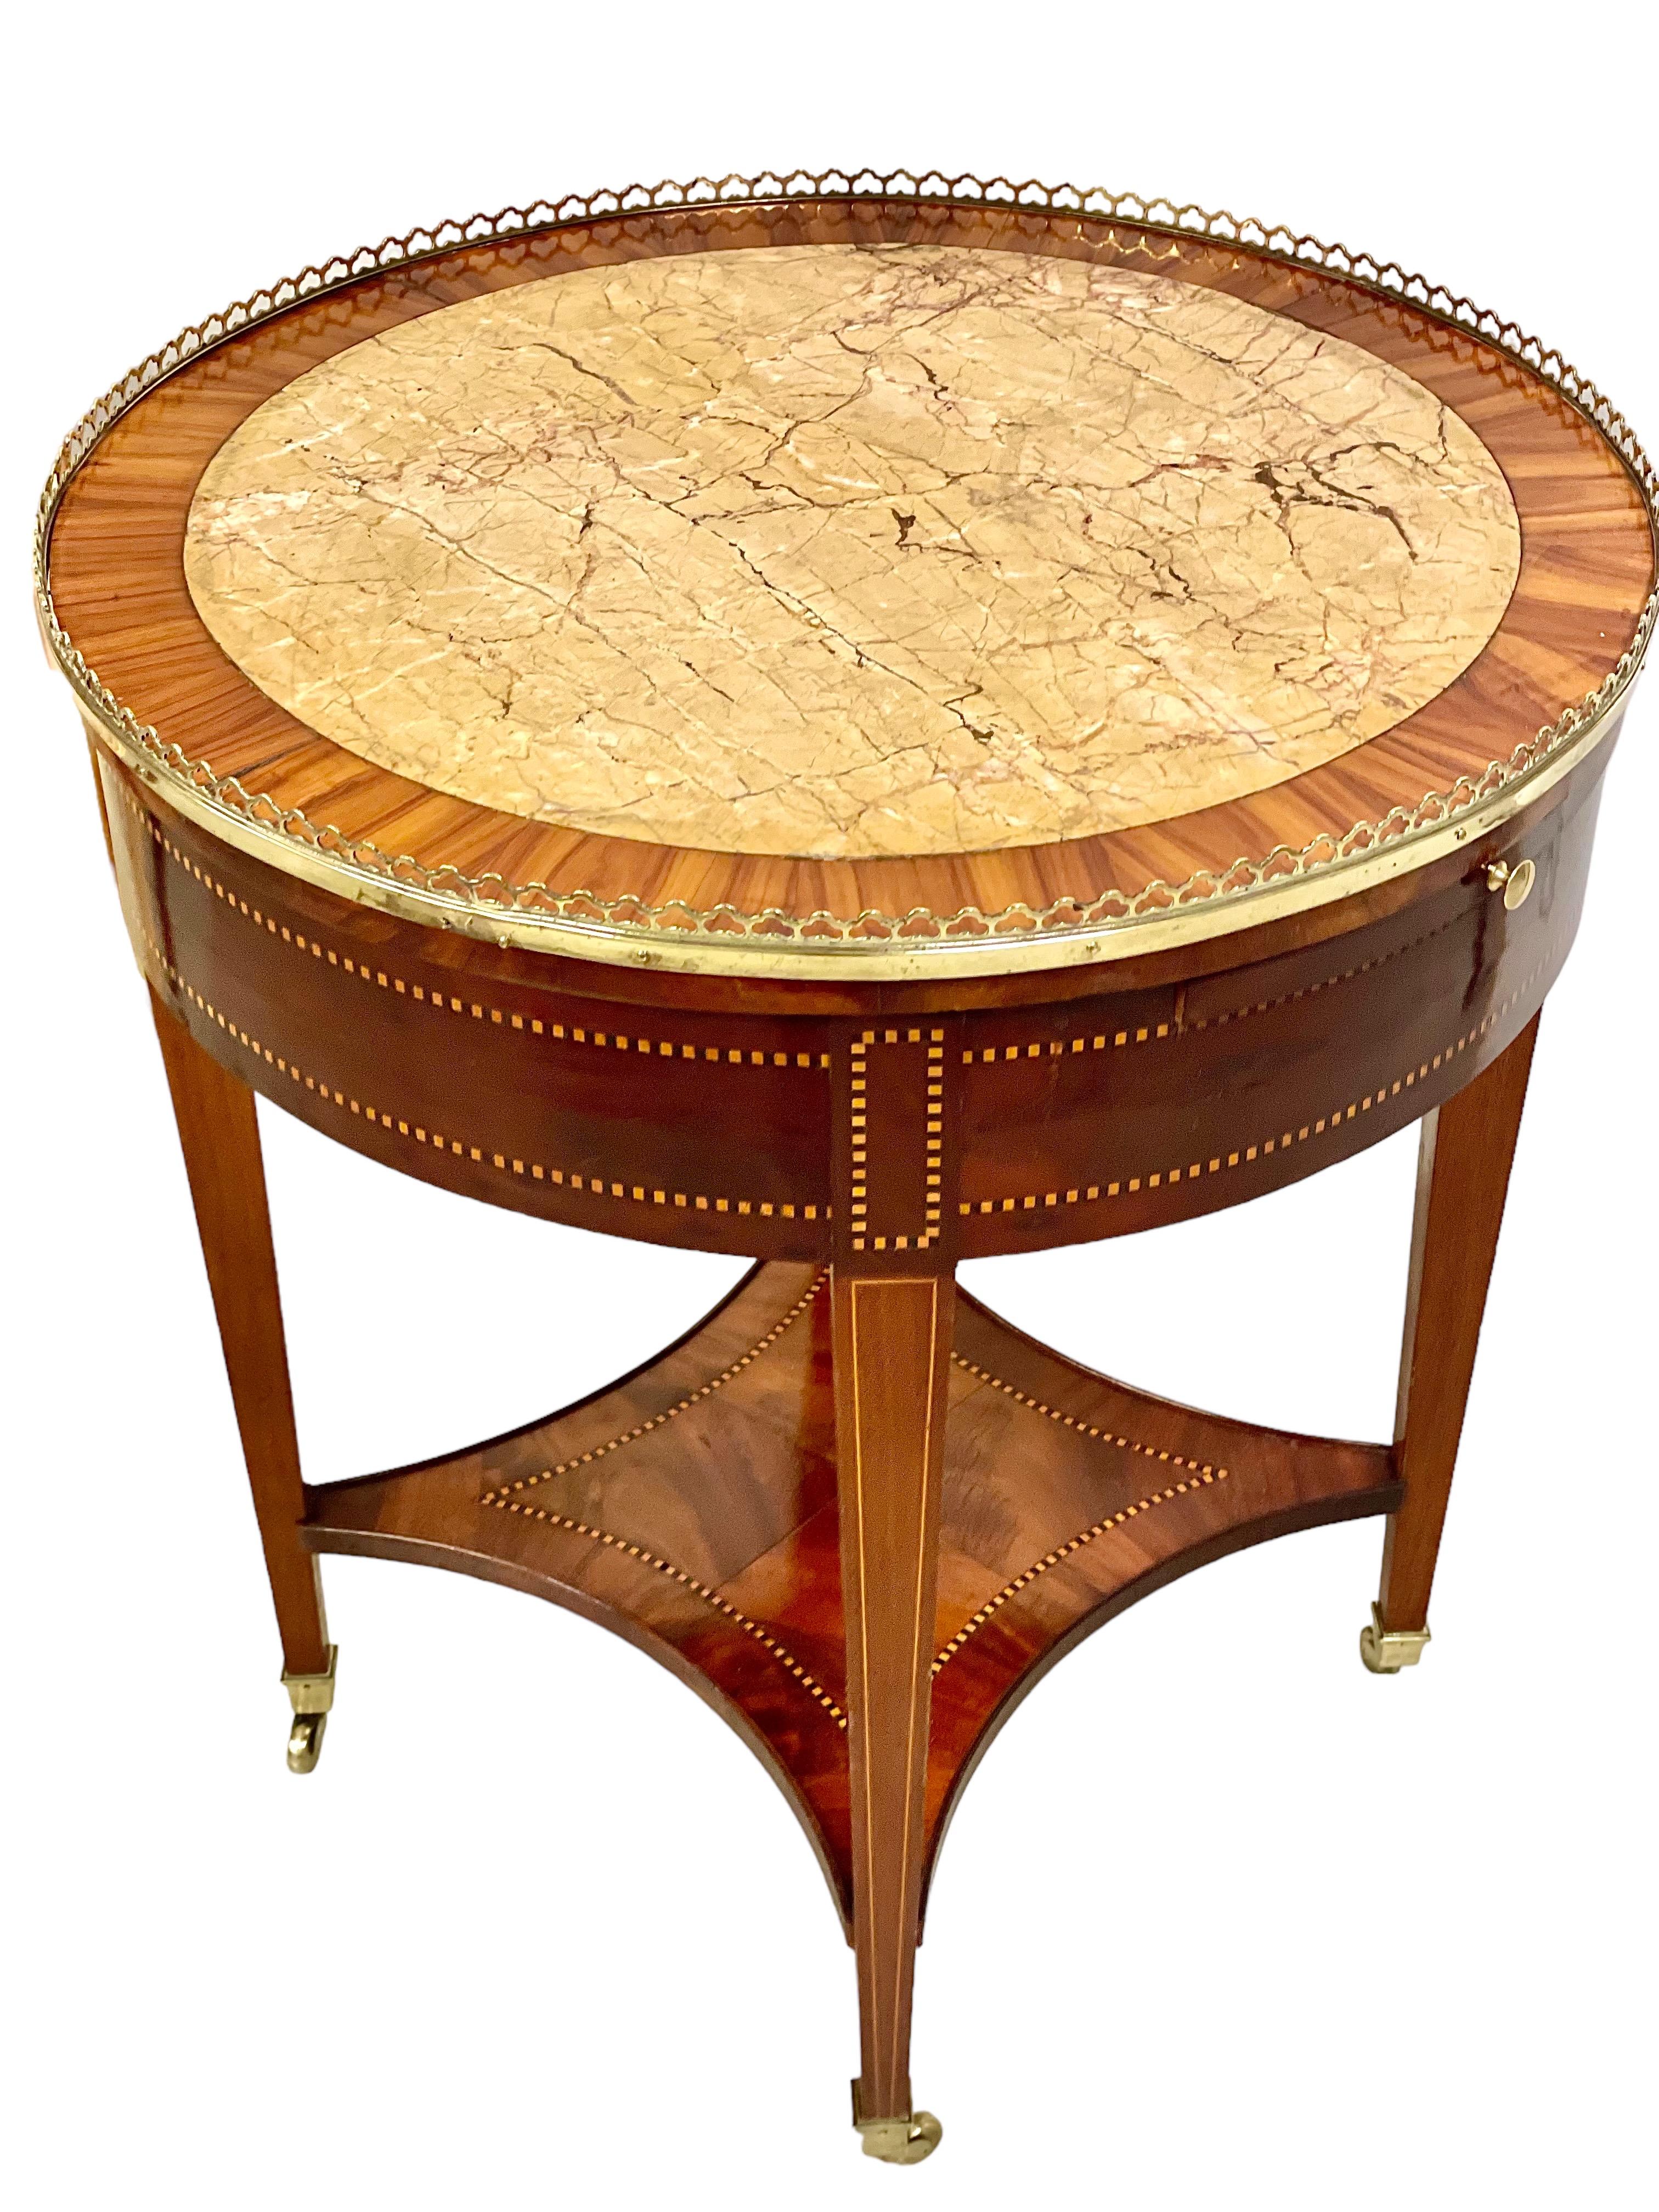 A fine French Louis XVI style 'Bouillotte' table, in wood veneer and marquetry, with an inlaid beige veined marble top surrounded by an openwork brass gallery. The gambling card game of bouillotte was so popular in France during the 18th century